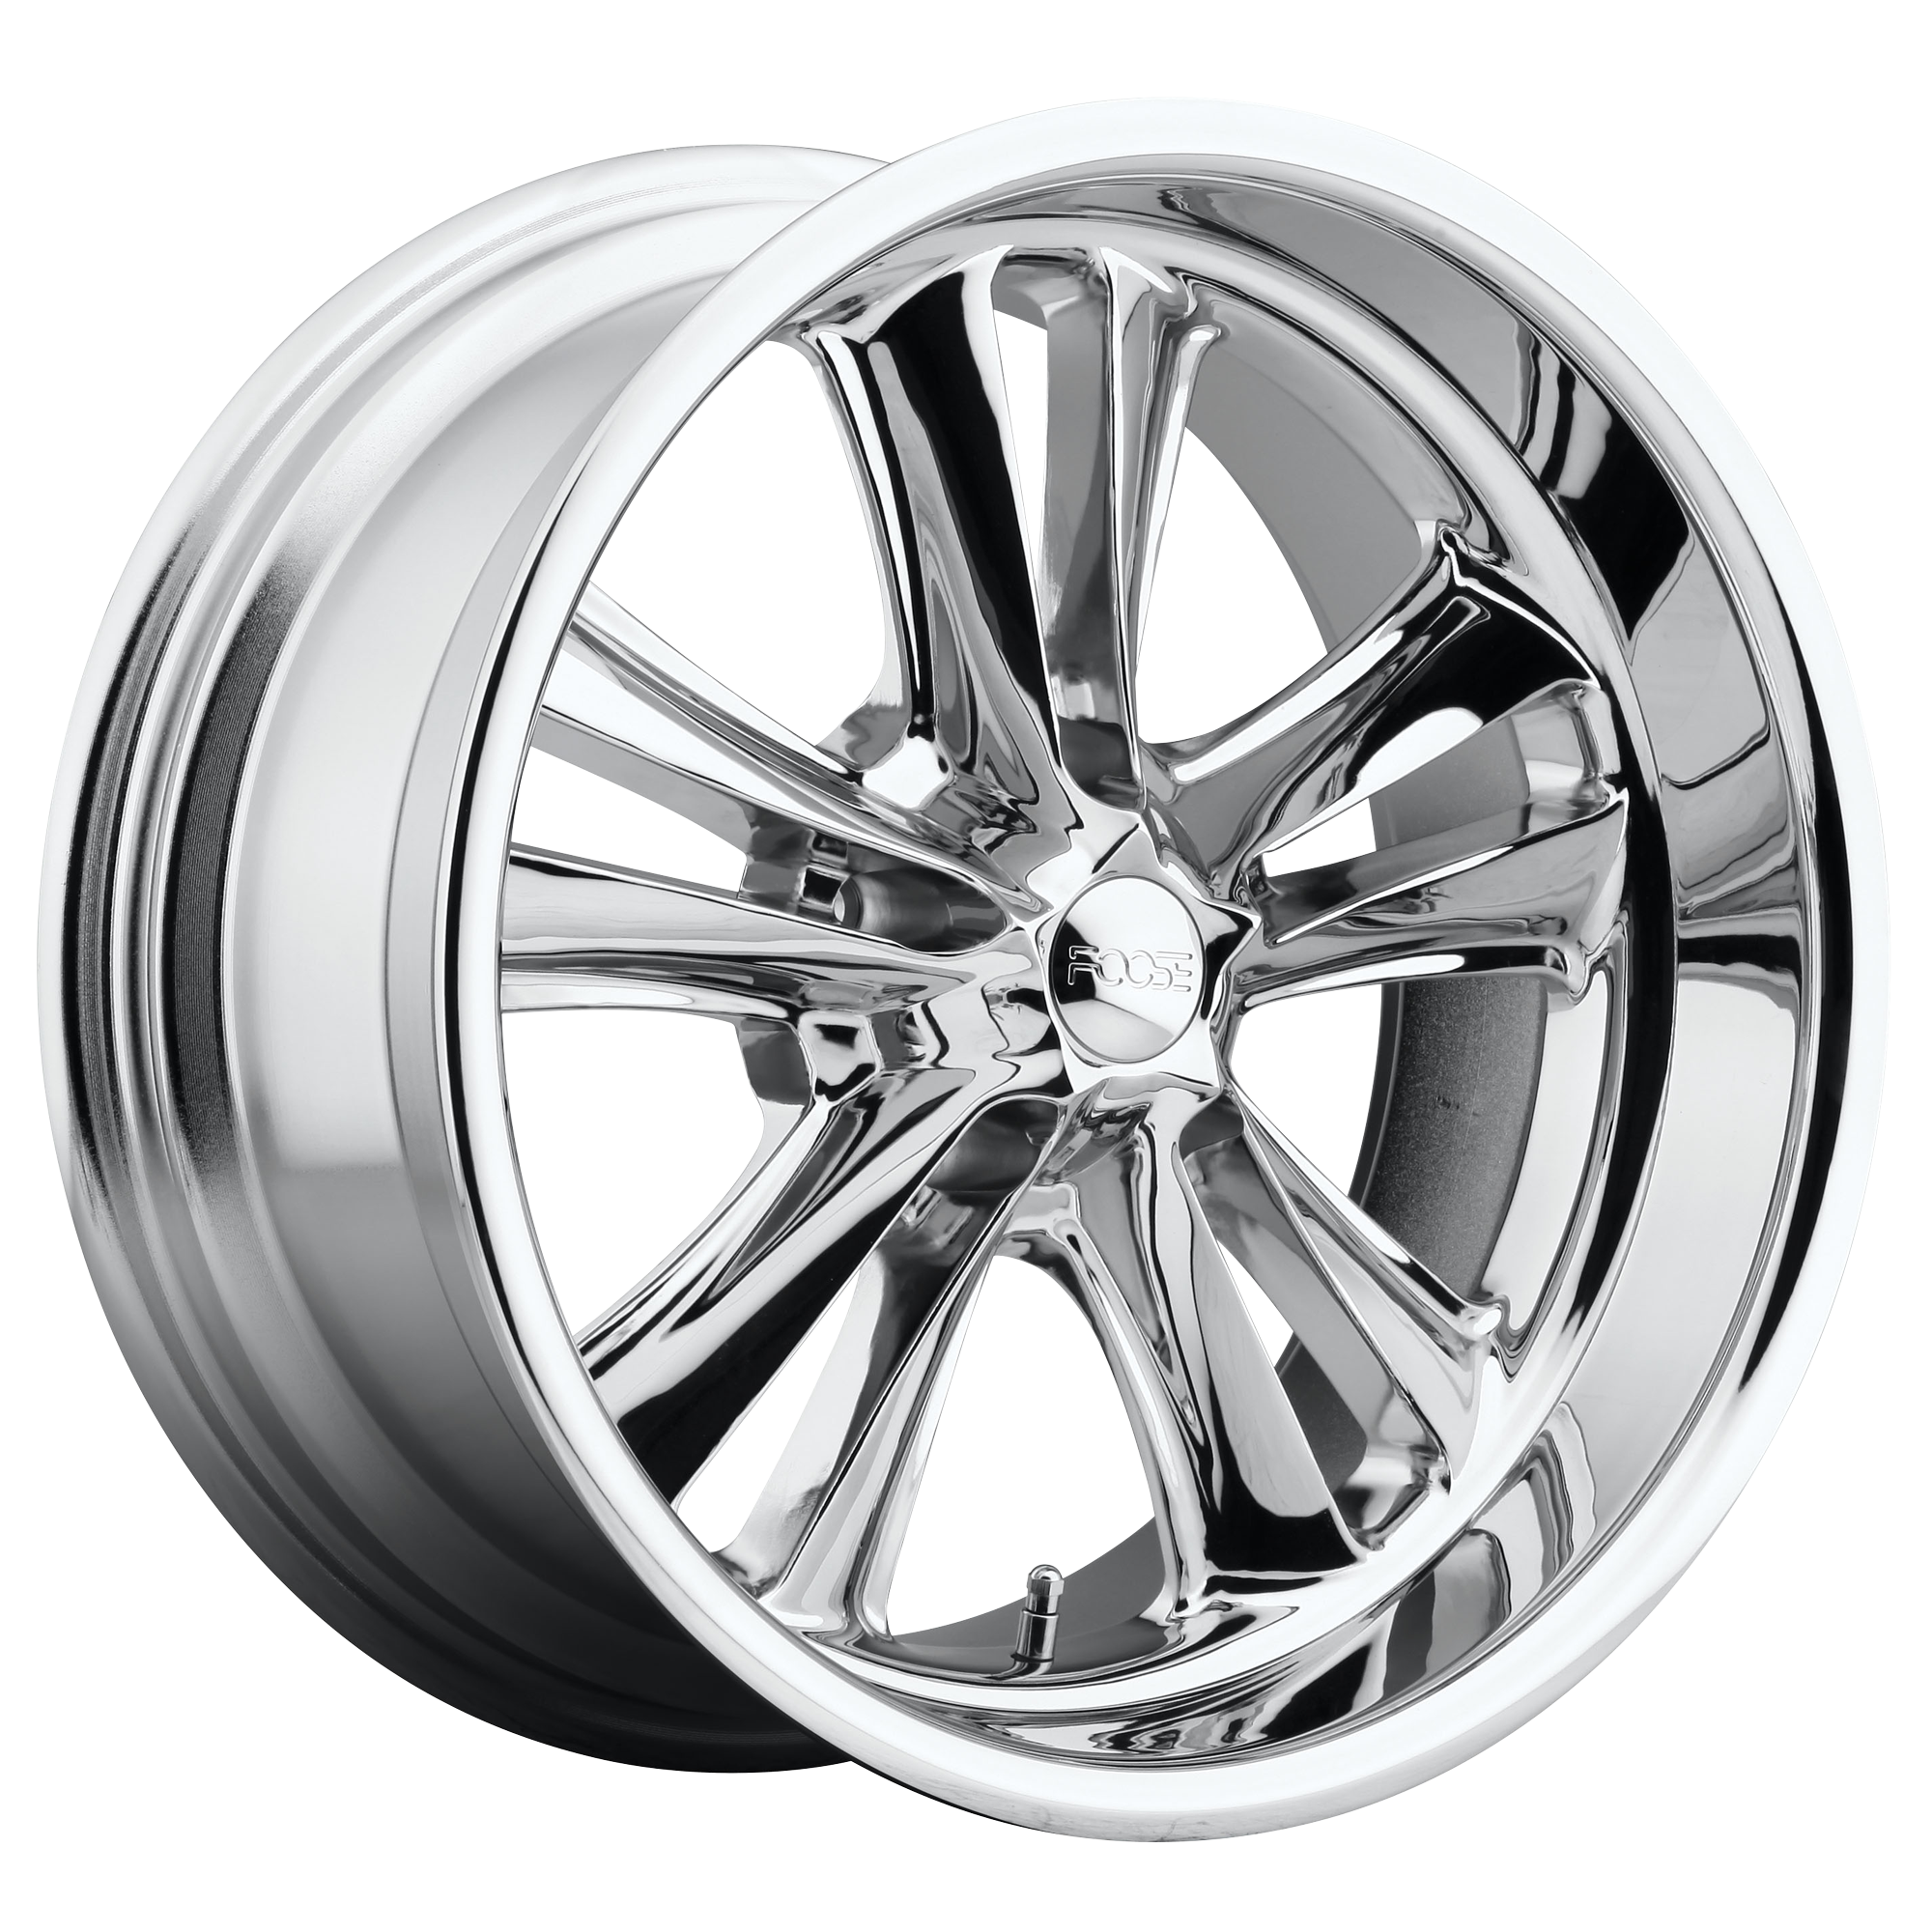 KNUCKLE 18x8 5x114.30 CHROME PLATED (1 mm) - Tires and Engine Performance